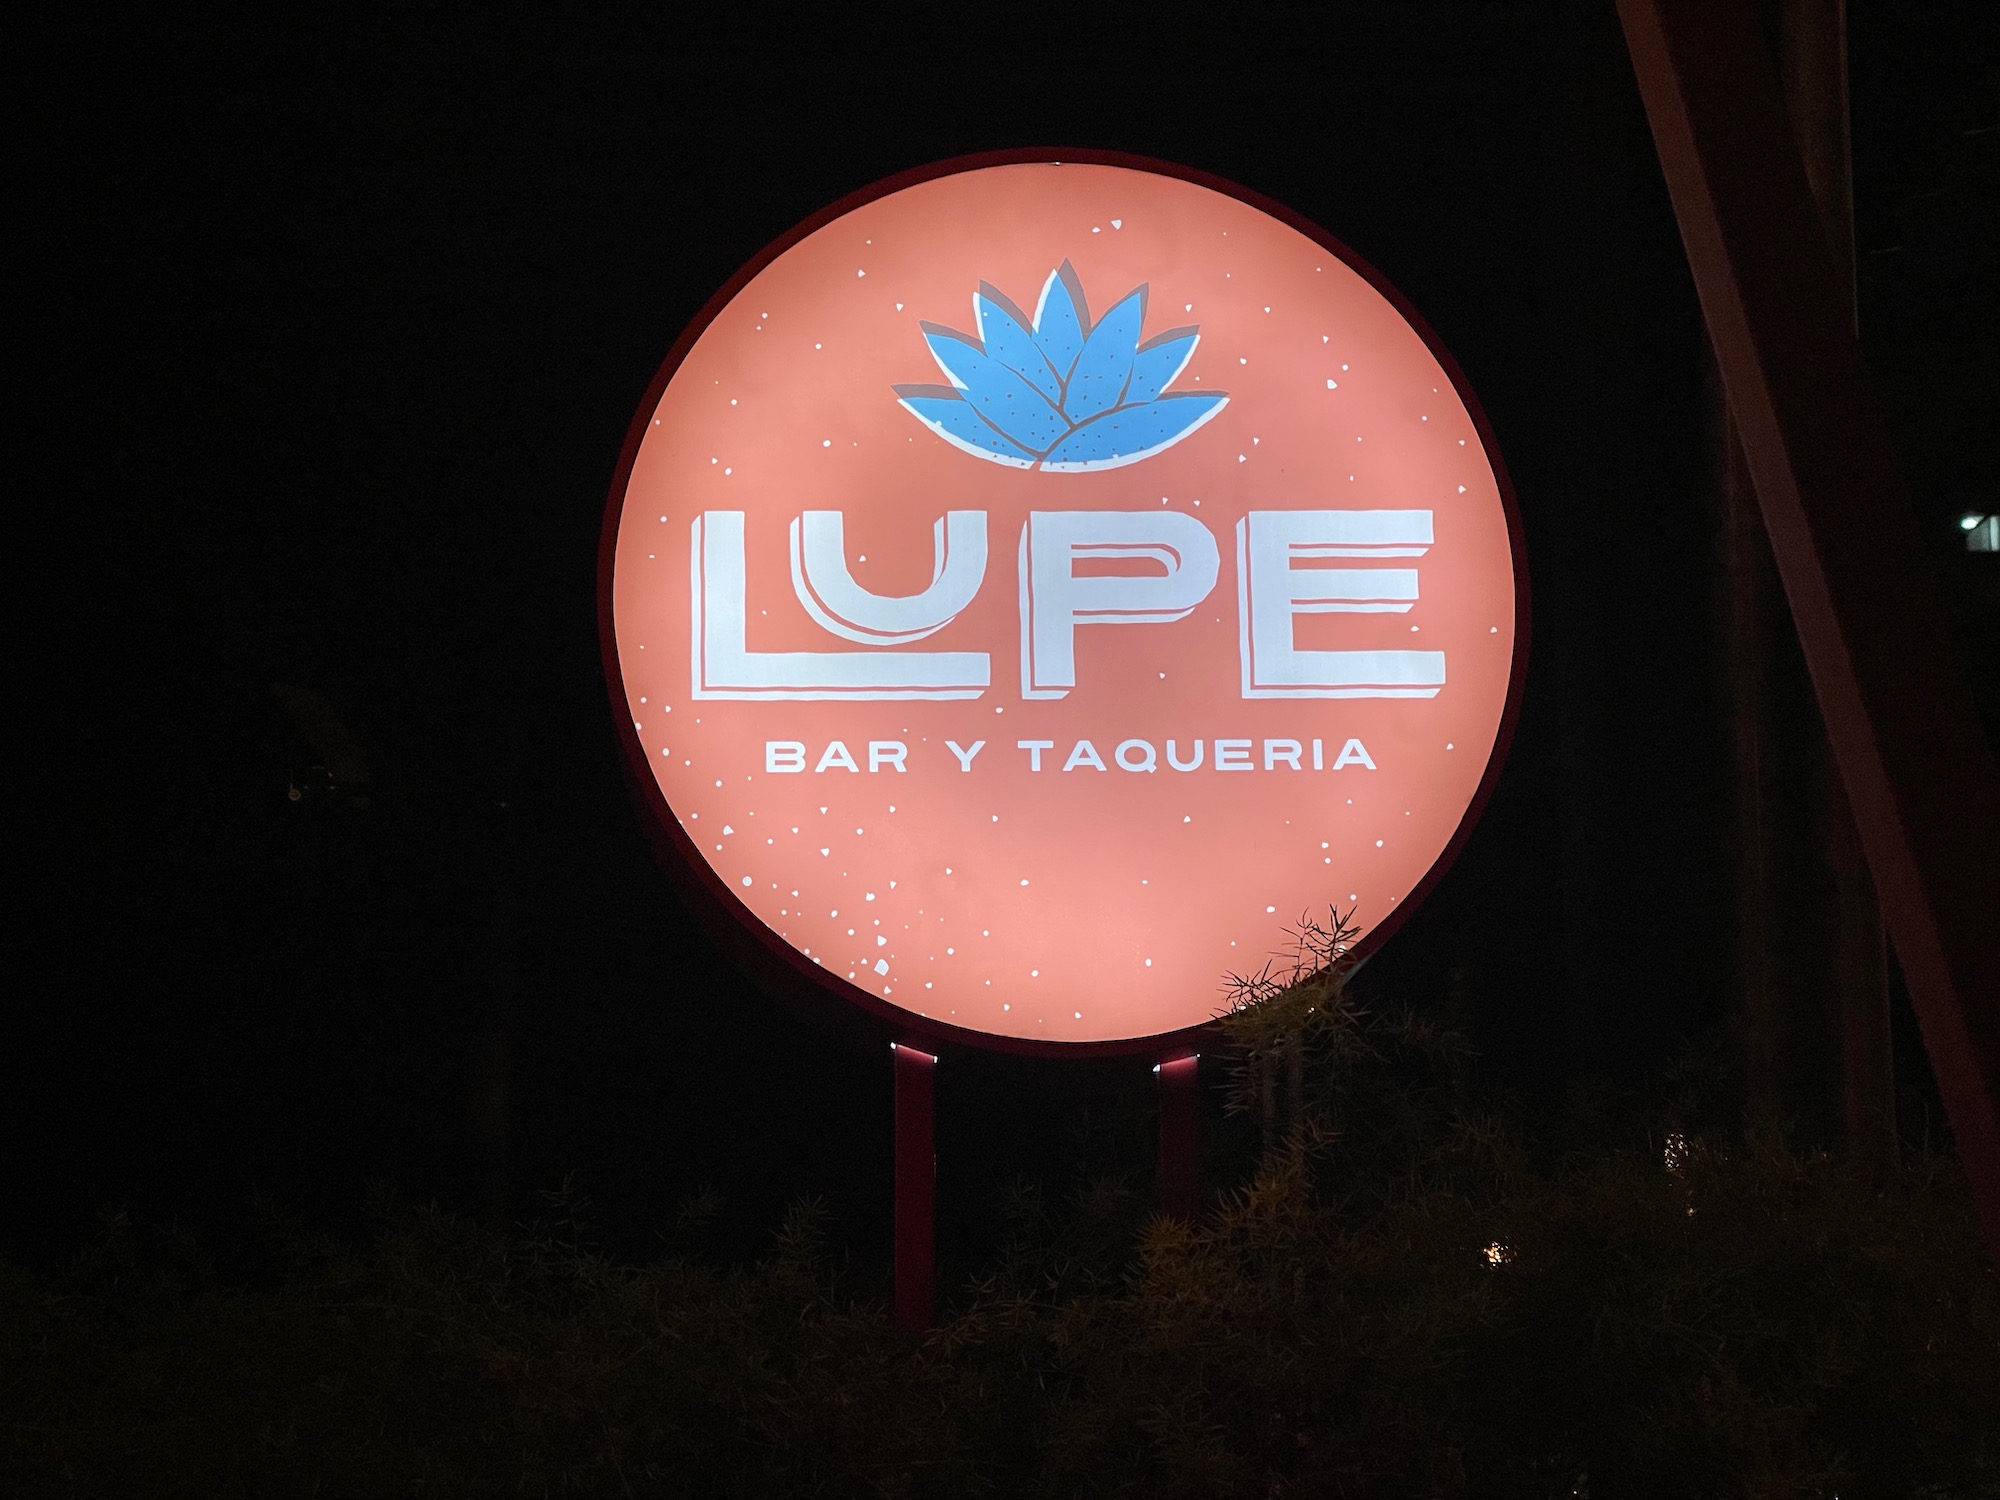 a sign outside at night